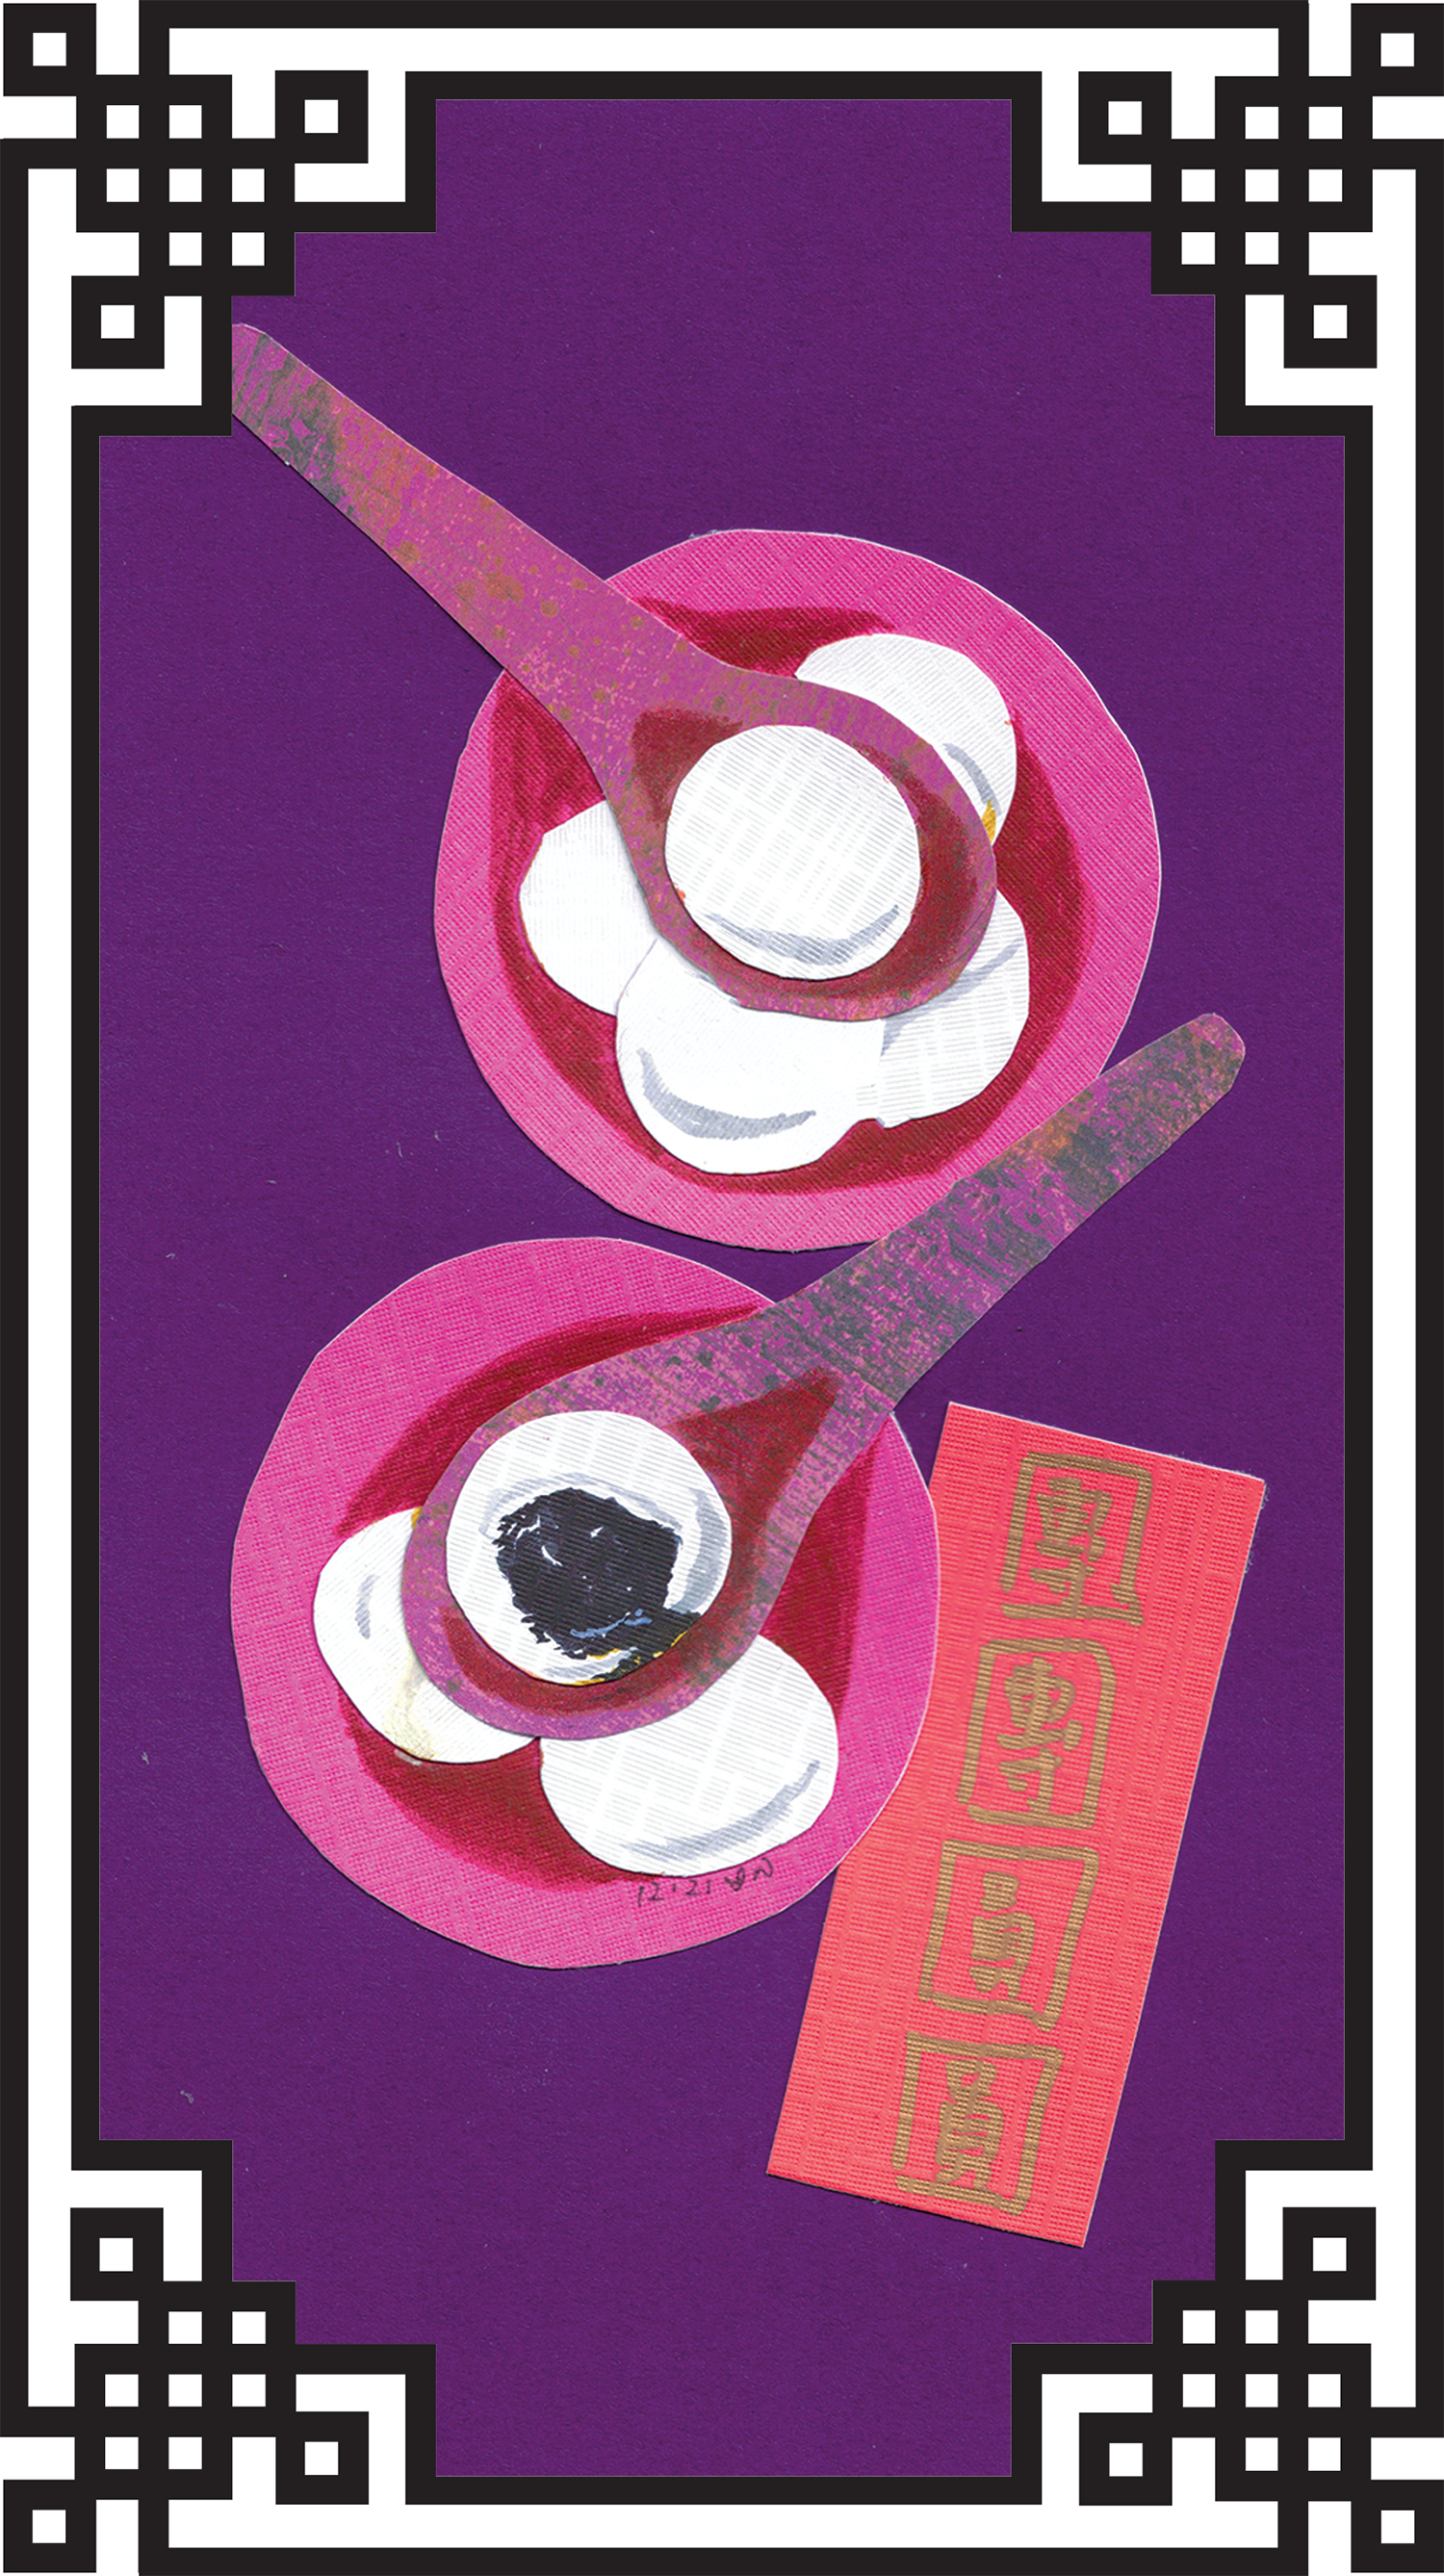 Vertical Yue Moon artwork of a paper-cut art featuring a Chinese rice dessert called Tangyuan, it is on a purple background with a traditional Chinese black & white border around it.